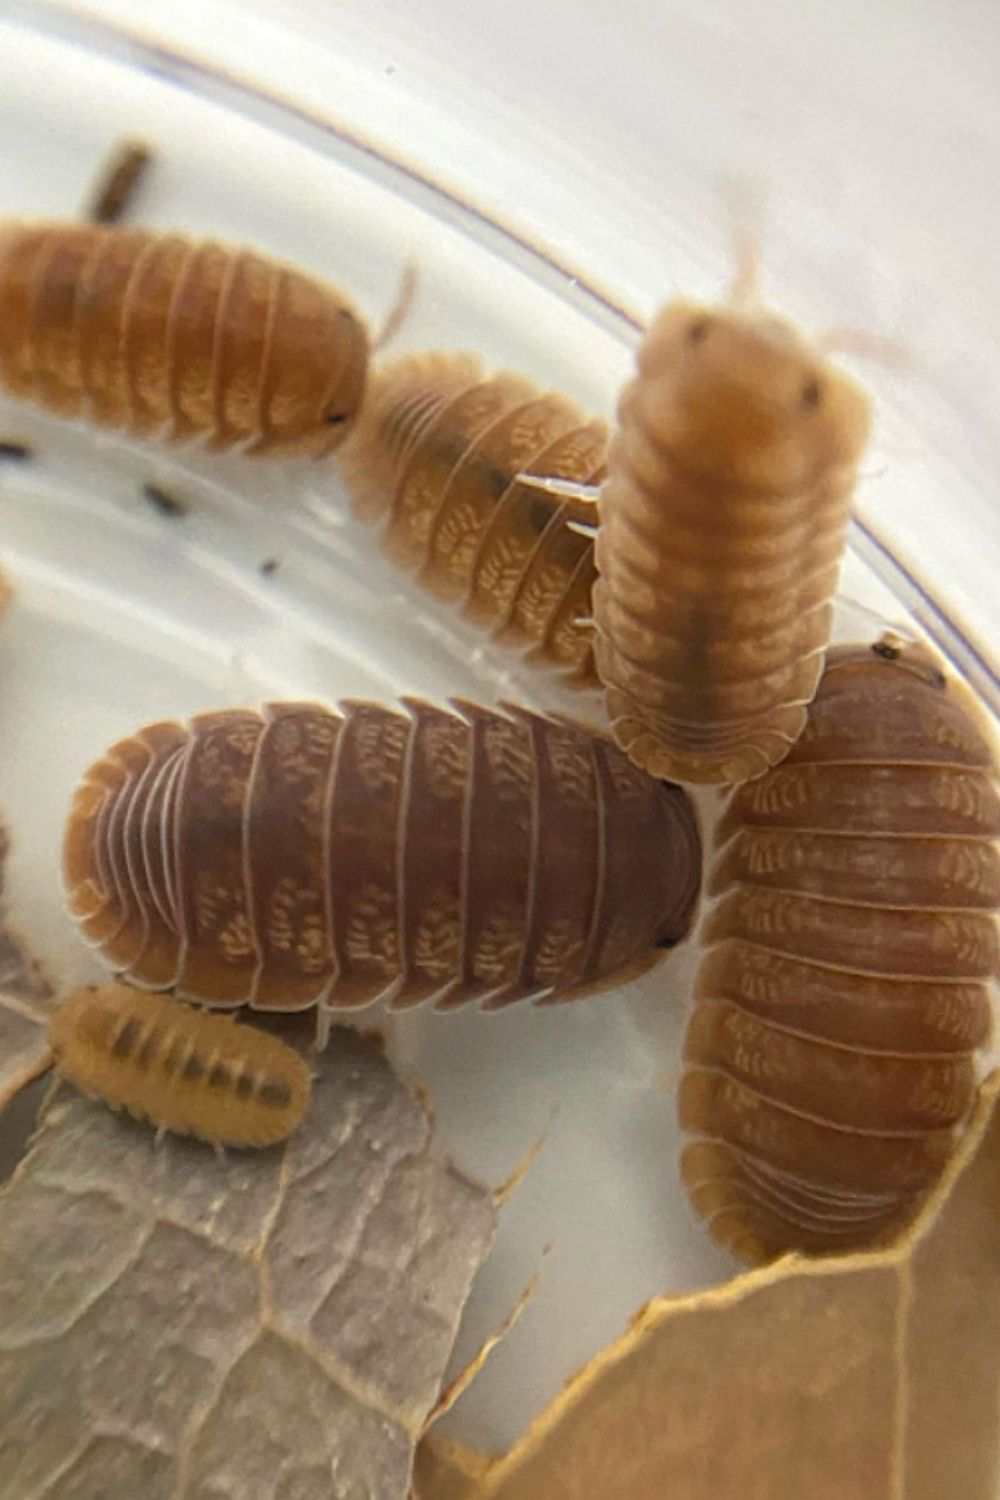 If you keep 12 Cubaris Murina isopods in a 1-liter tank, they'll grow to 25 isopods in 2-3 weeks